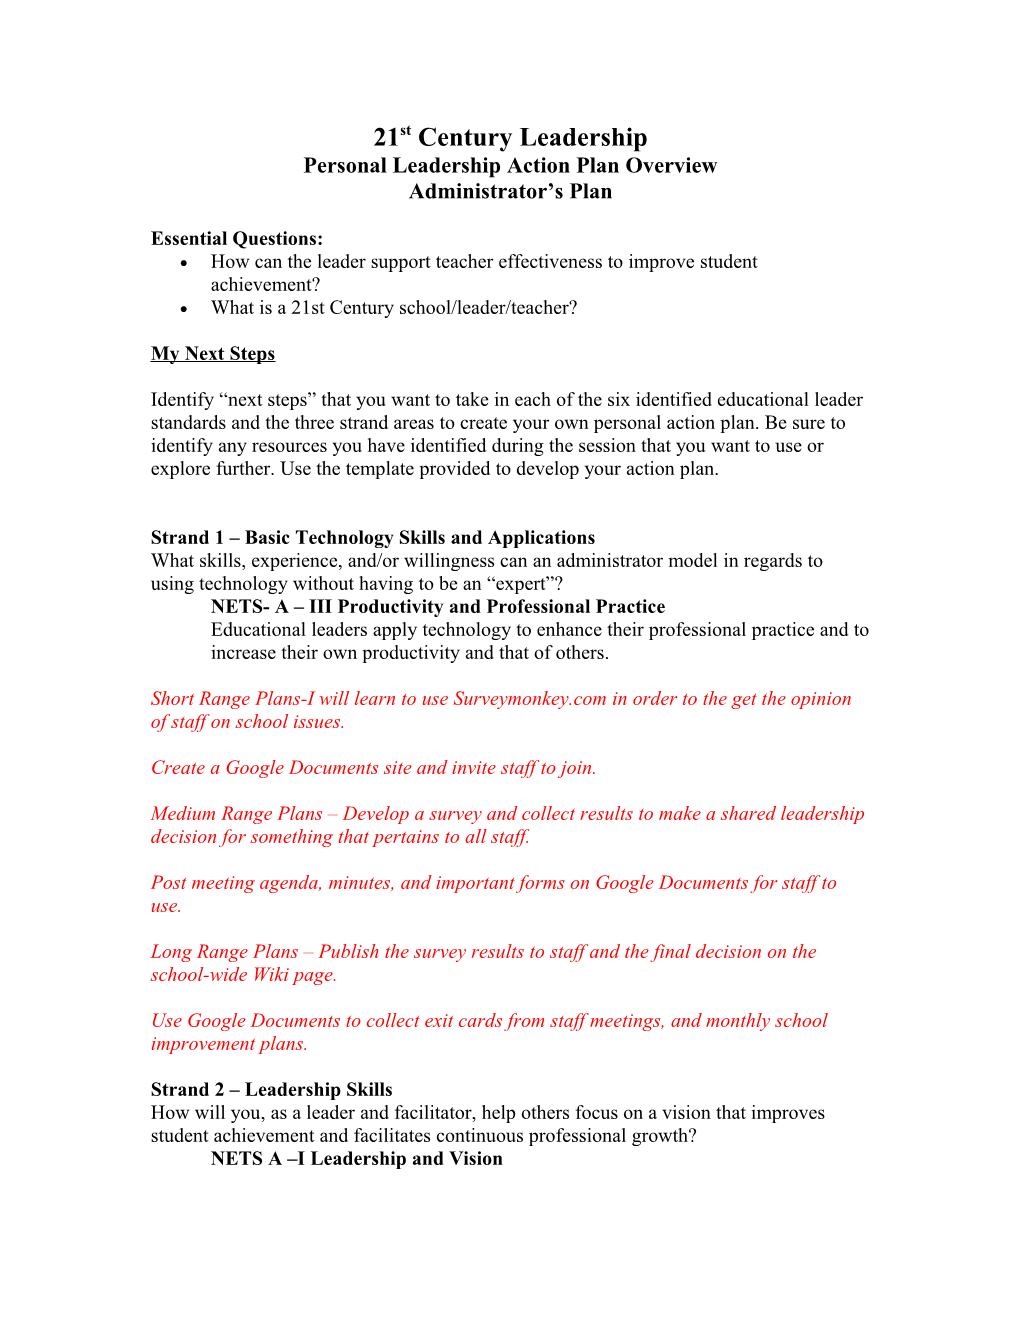 Personal Leadership Action Plan Overview